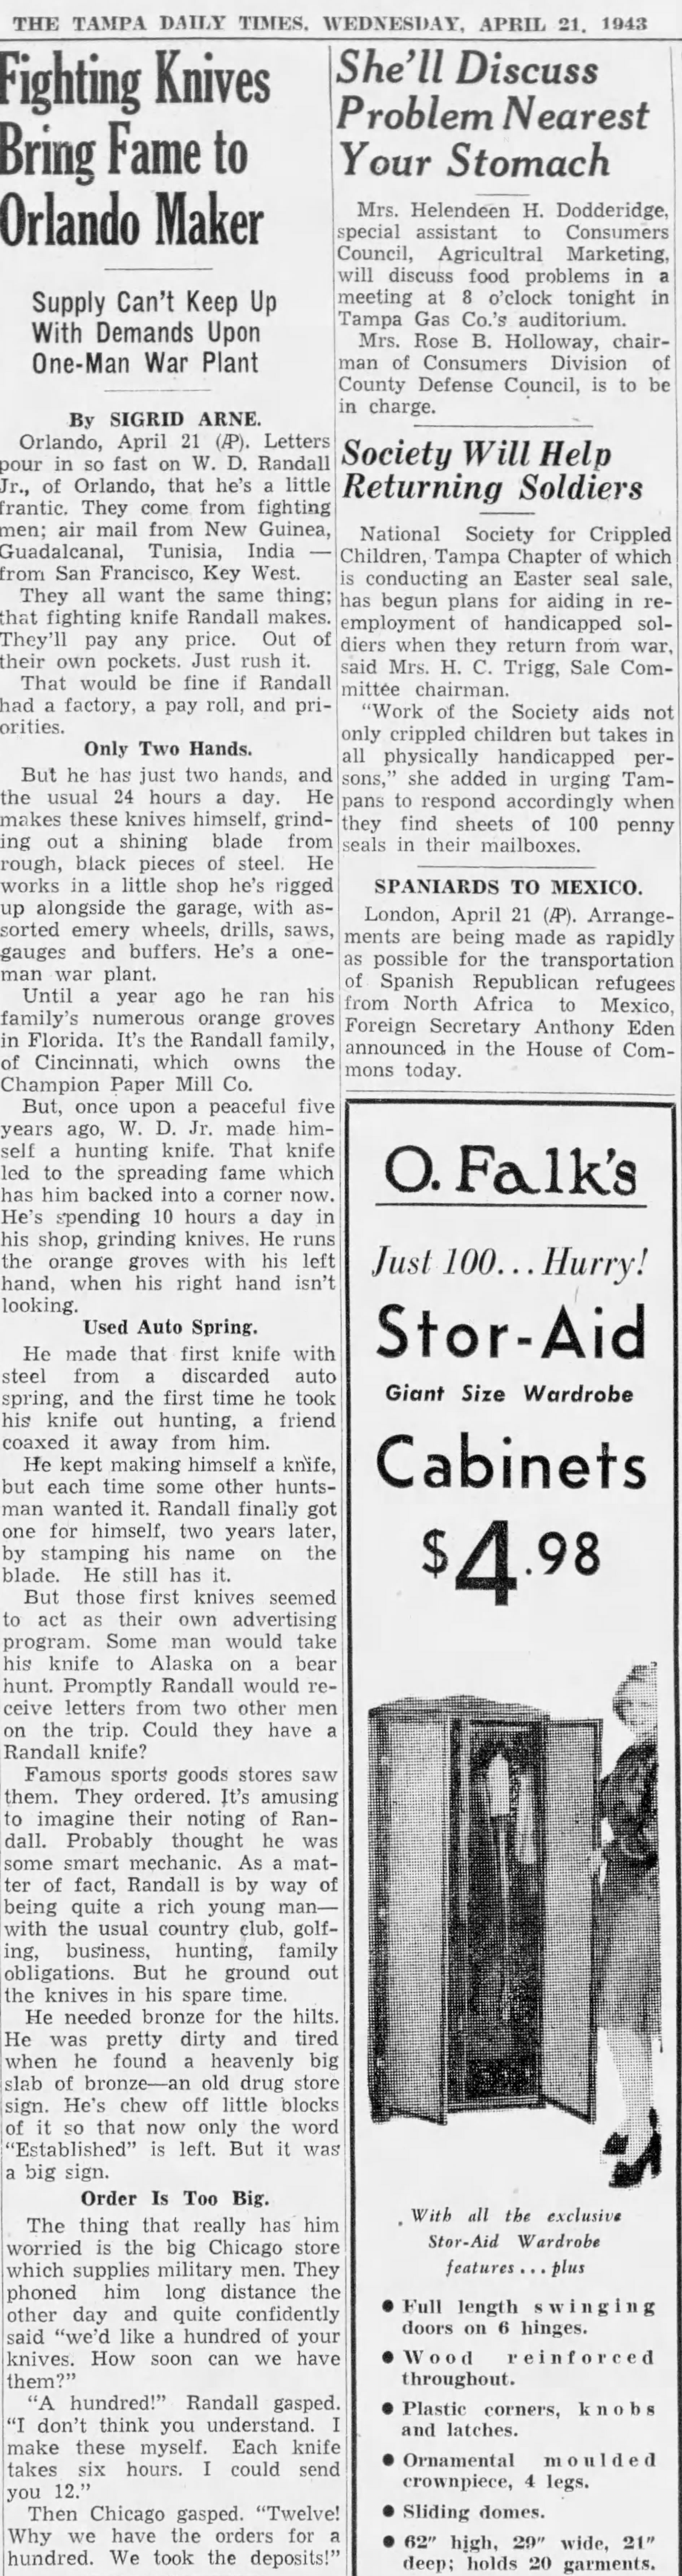 The_Tampa_Times_Wed__Apr_21__1943_.jpg